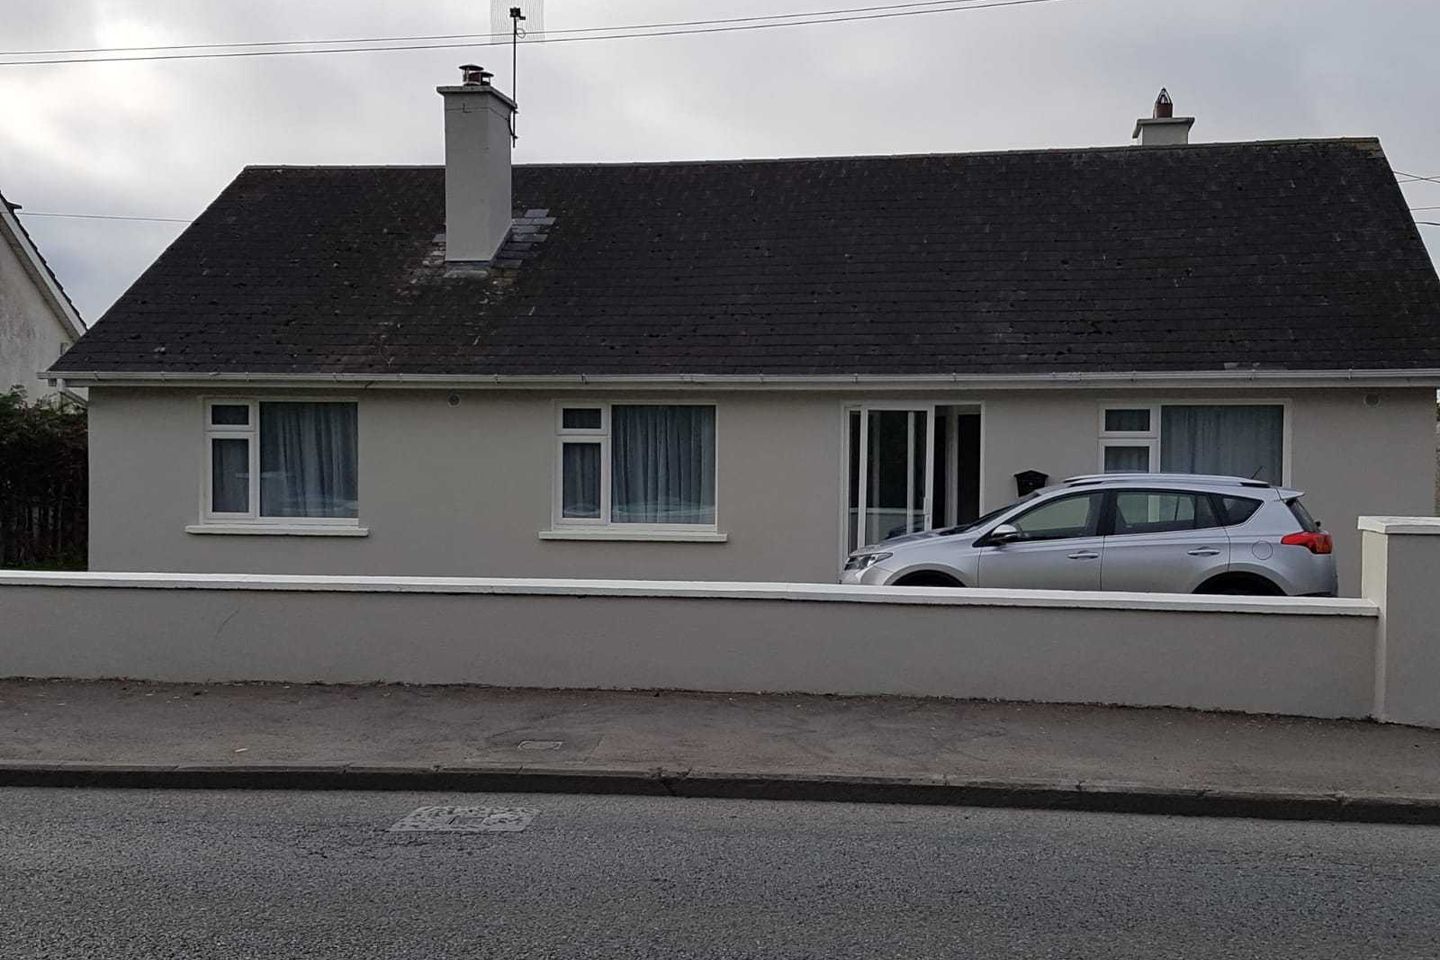 Saint Mary's Road, Edenderry, Co. Offaly